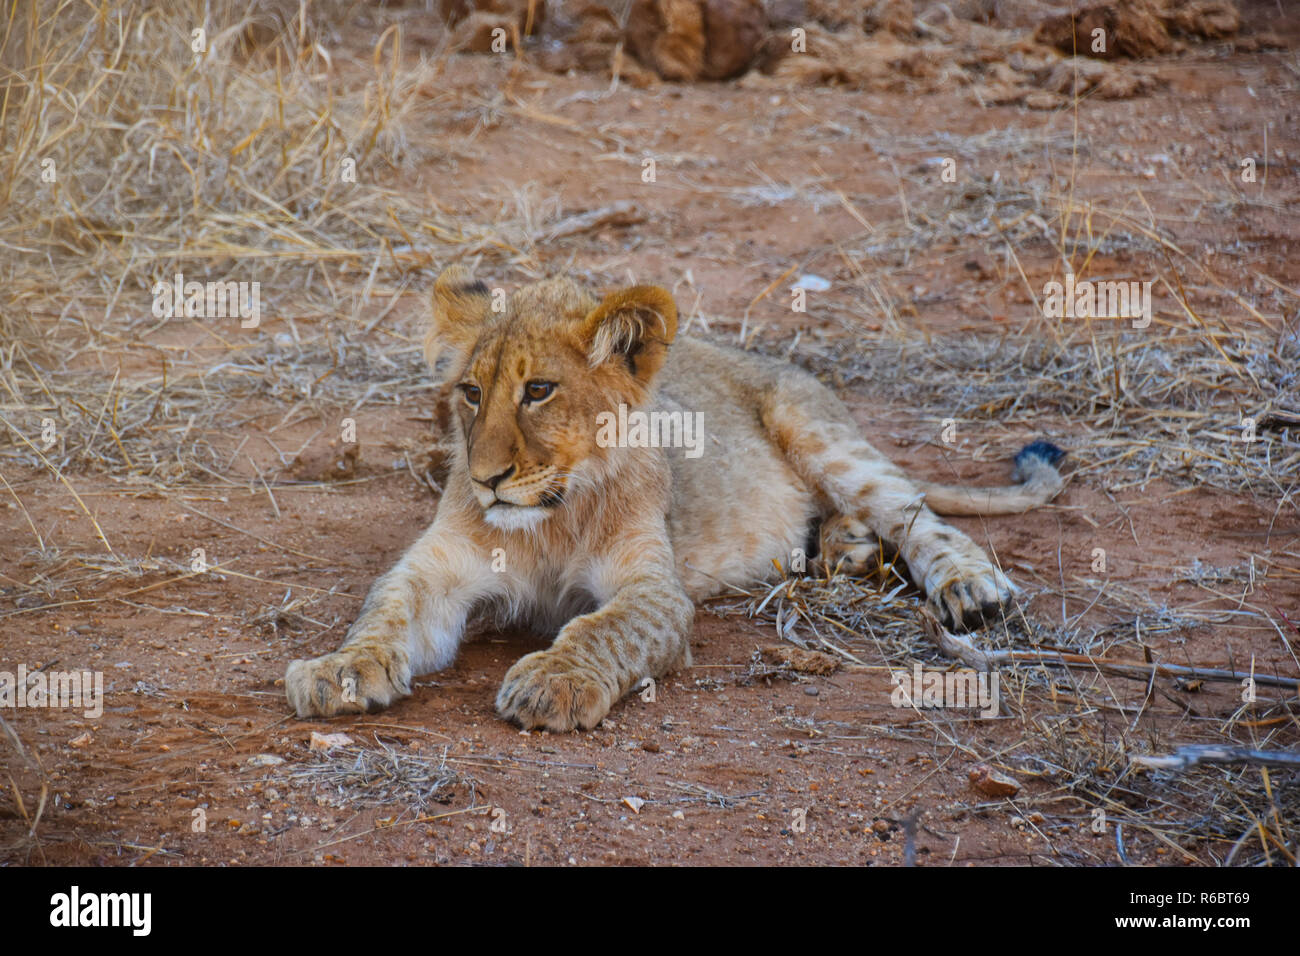 young lion resting on ground in South African wildlifecute,  preserve Stock Photo